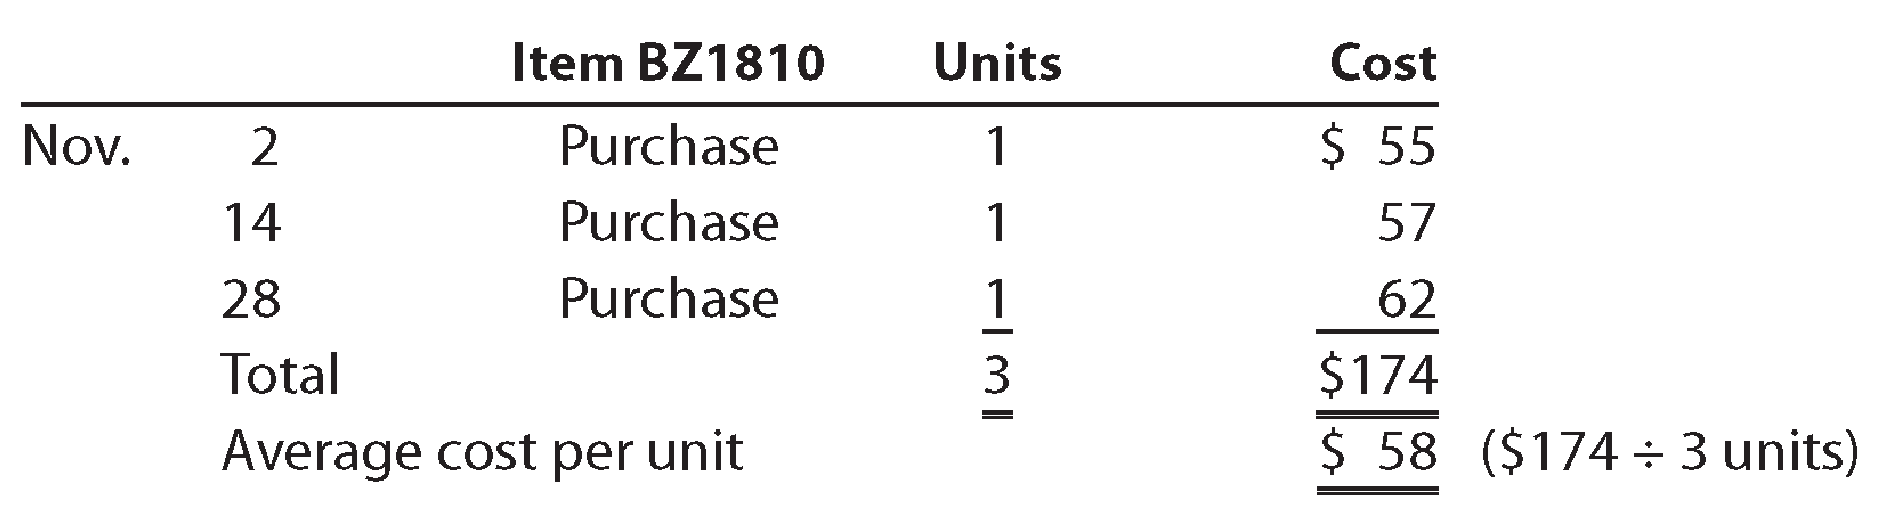 Chapter 7, Problem 1PEA, The following three identical units of Item BZ1810 are purchased during November: Assume that one 